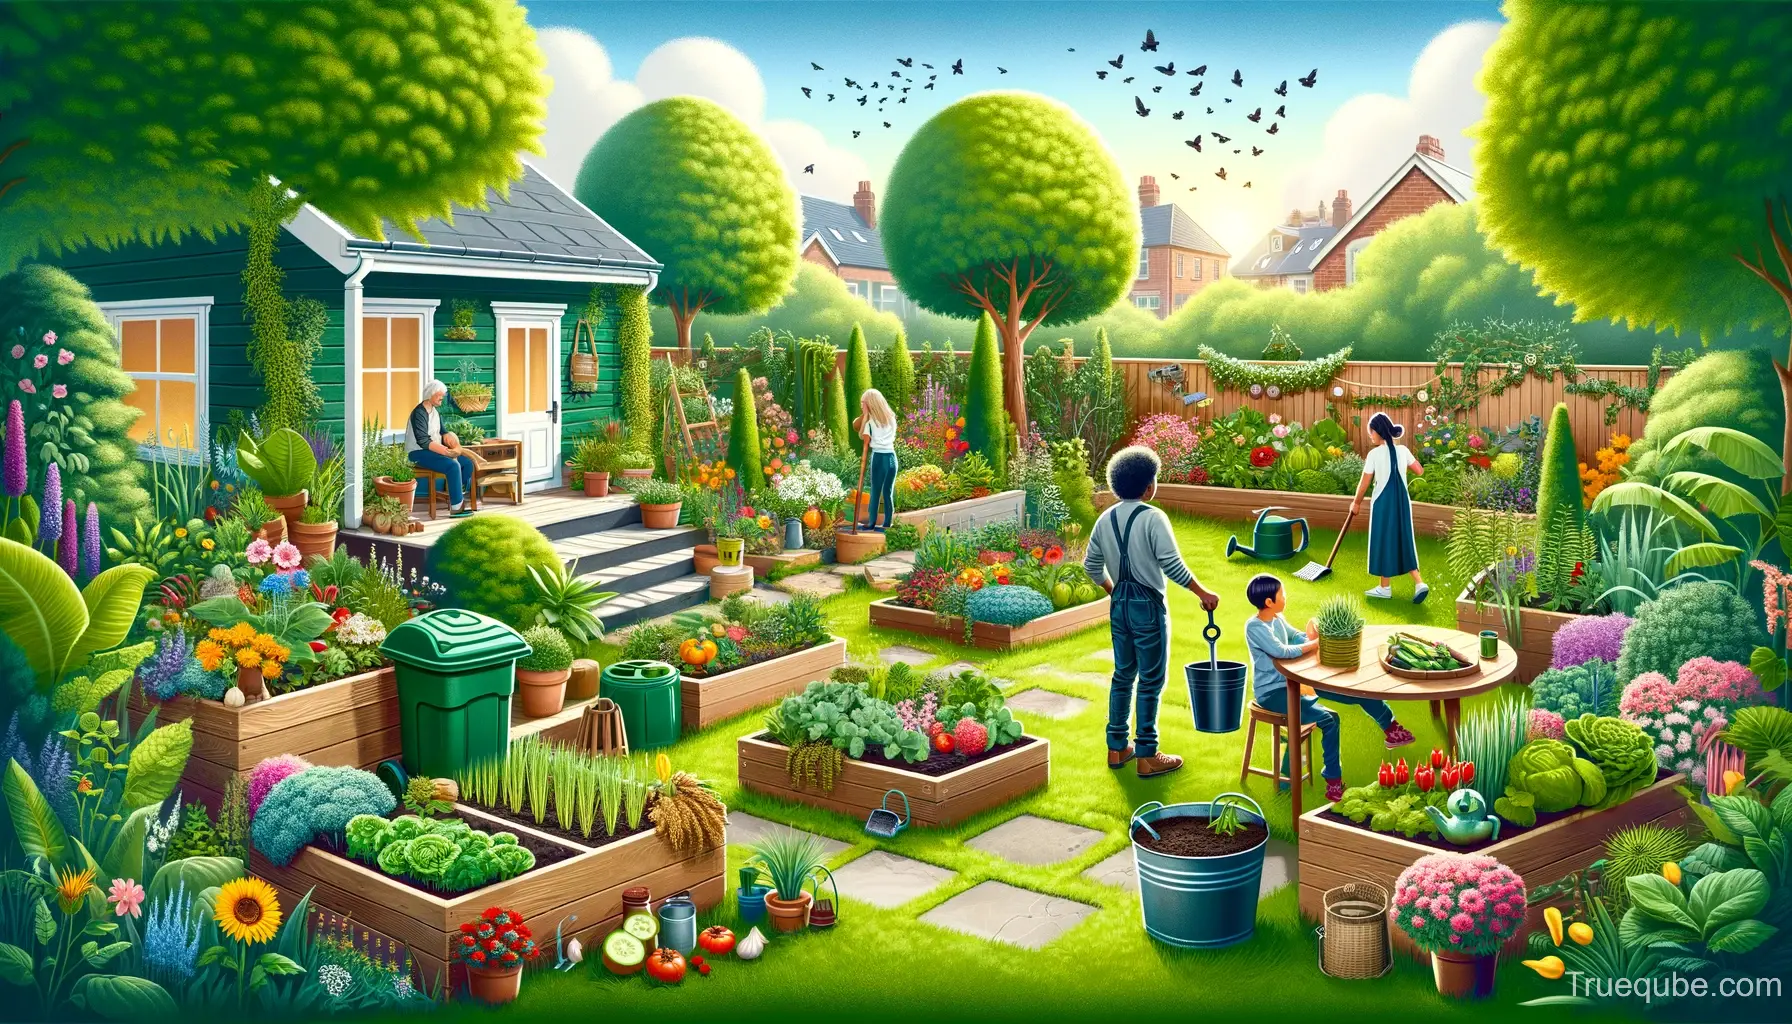 Improving Your Backyard The Ultimate Guide for a Greener Space